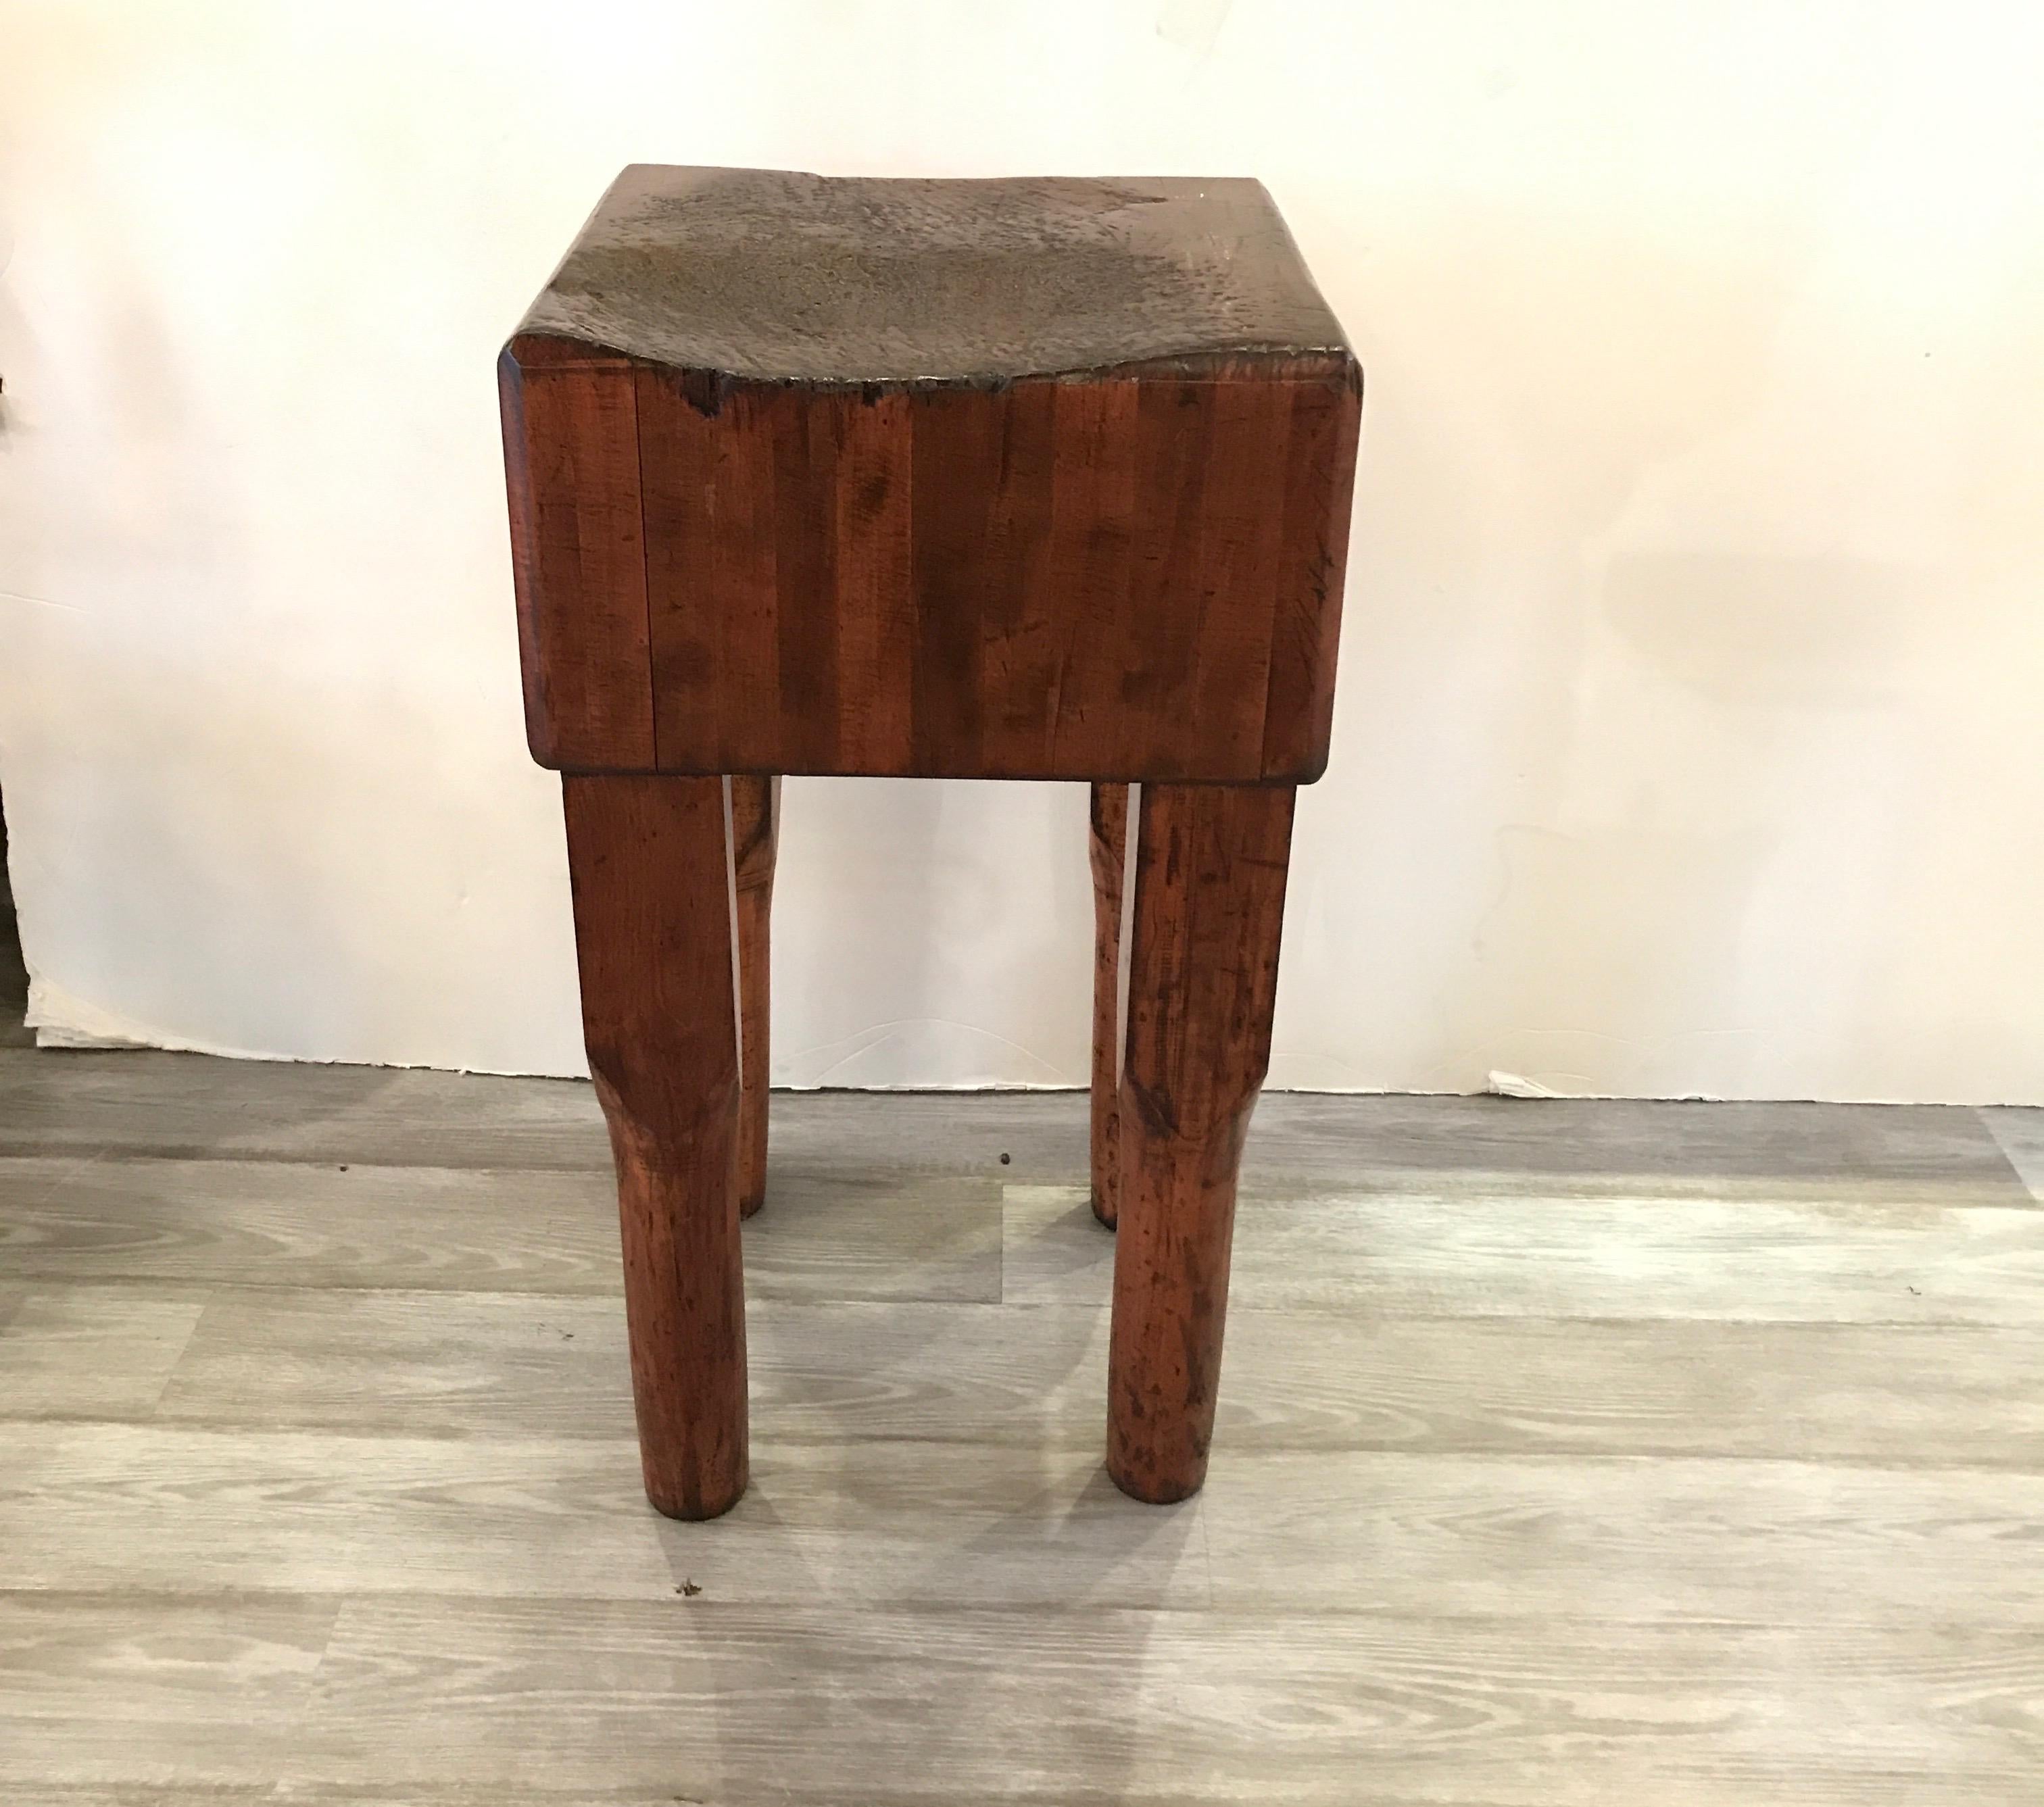 A perfectly sized chopping block of solid and well aged maple. The butchers workstation was well used and had been preserved with tits original patination with hollows and indentations from decades of use. The heavy thick top with sturdy legs,